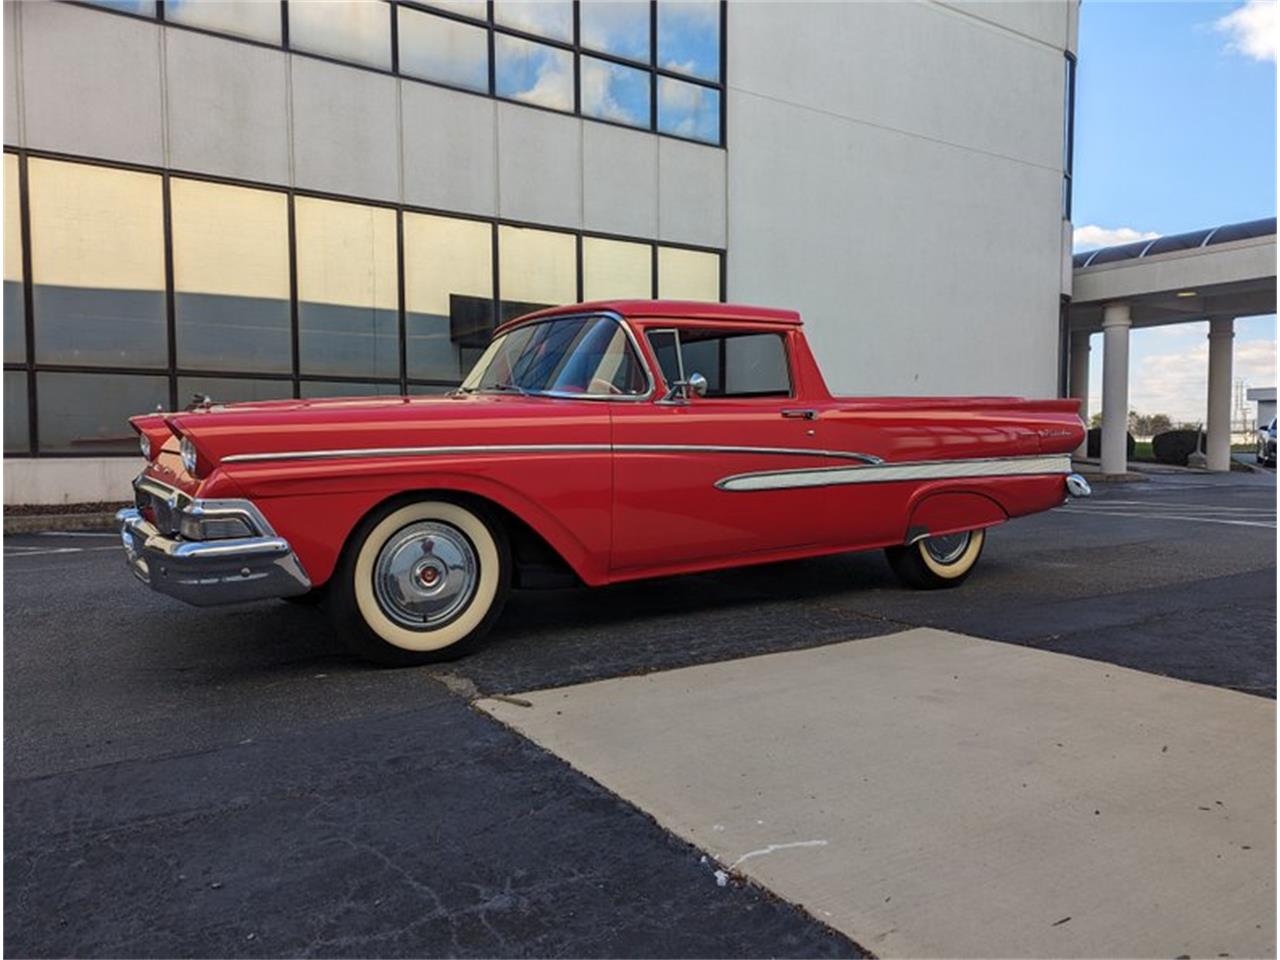 For Sale at Auction: 1958 Ford Ranchero in Greensboro, North Carolina for sale in Greensboro, NC